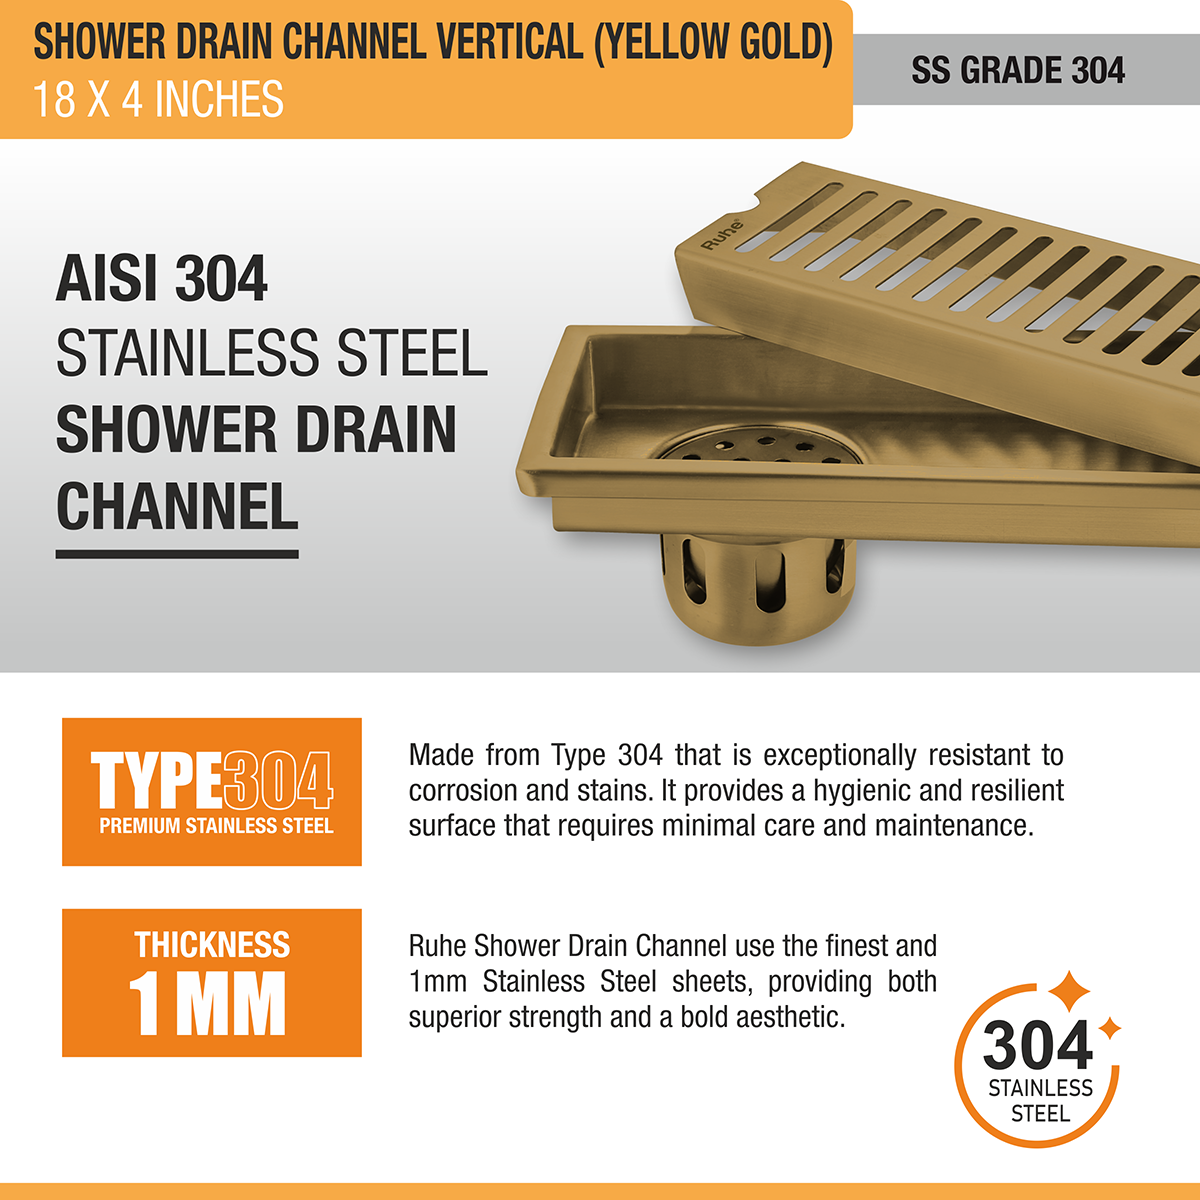 Vertical Shower Drain Channel (18 x 4 Inches) YELLOW GOLD stainless steel